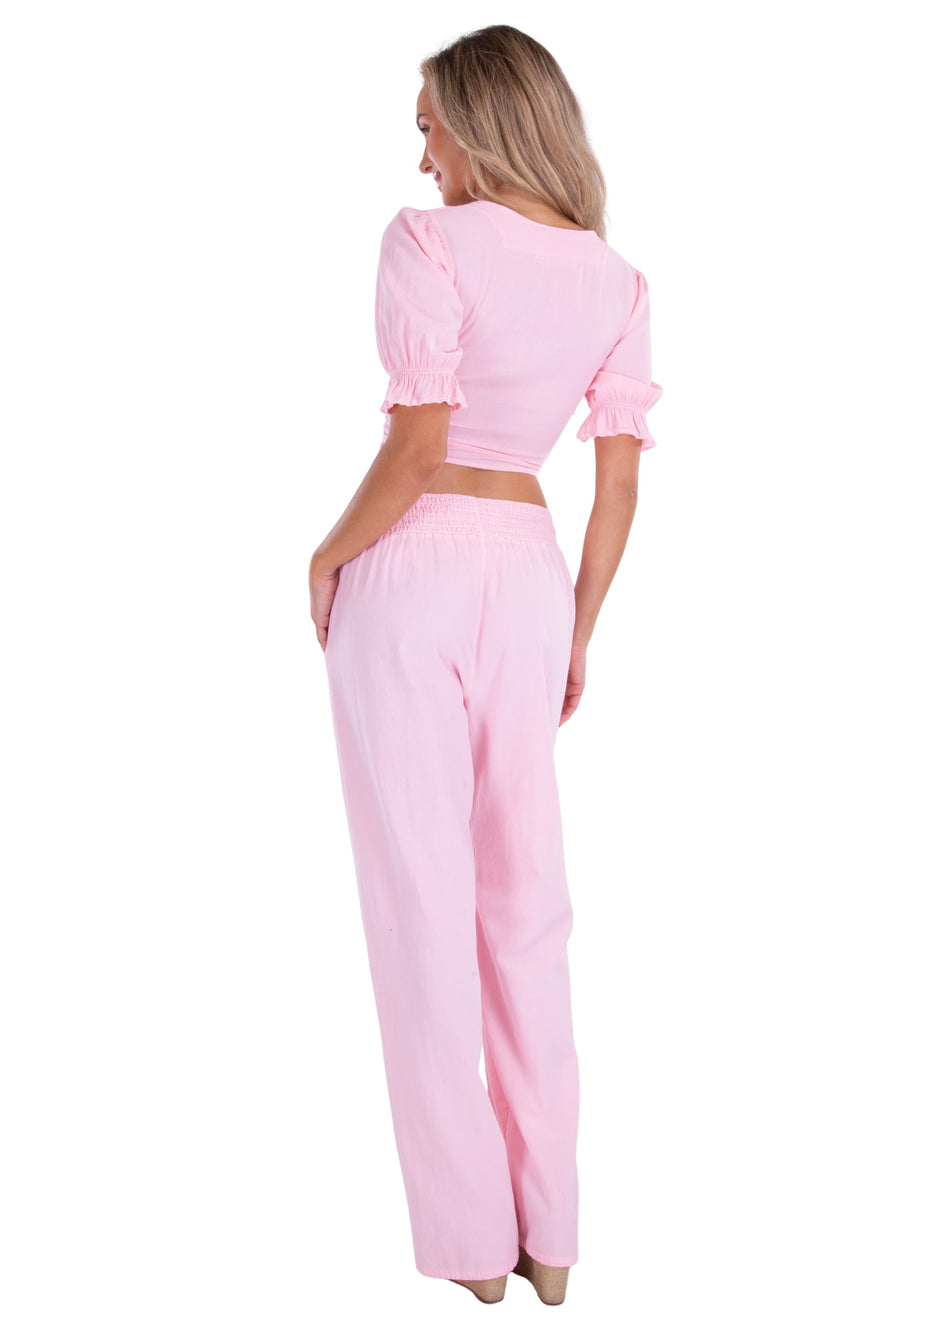 NW1175 - Baby Pink Cotton Pants